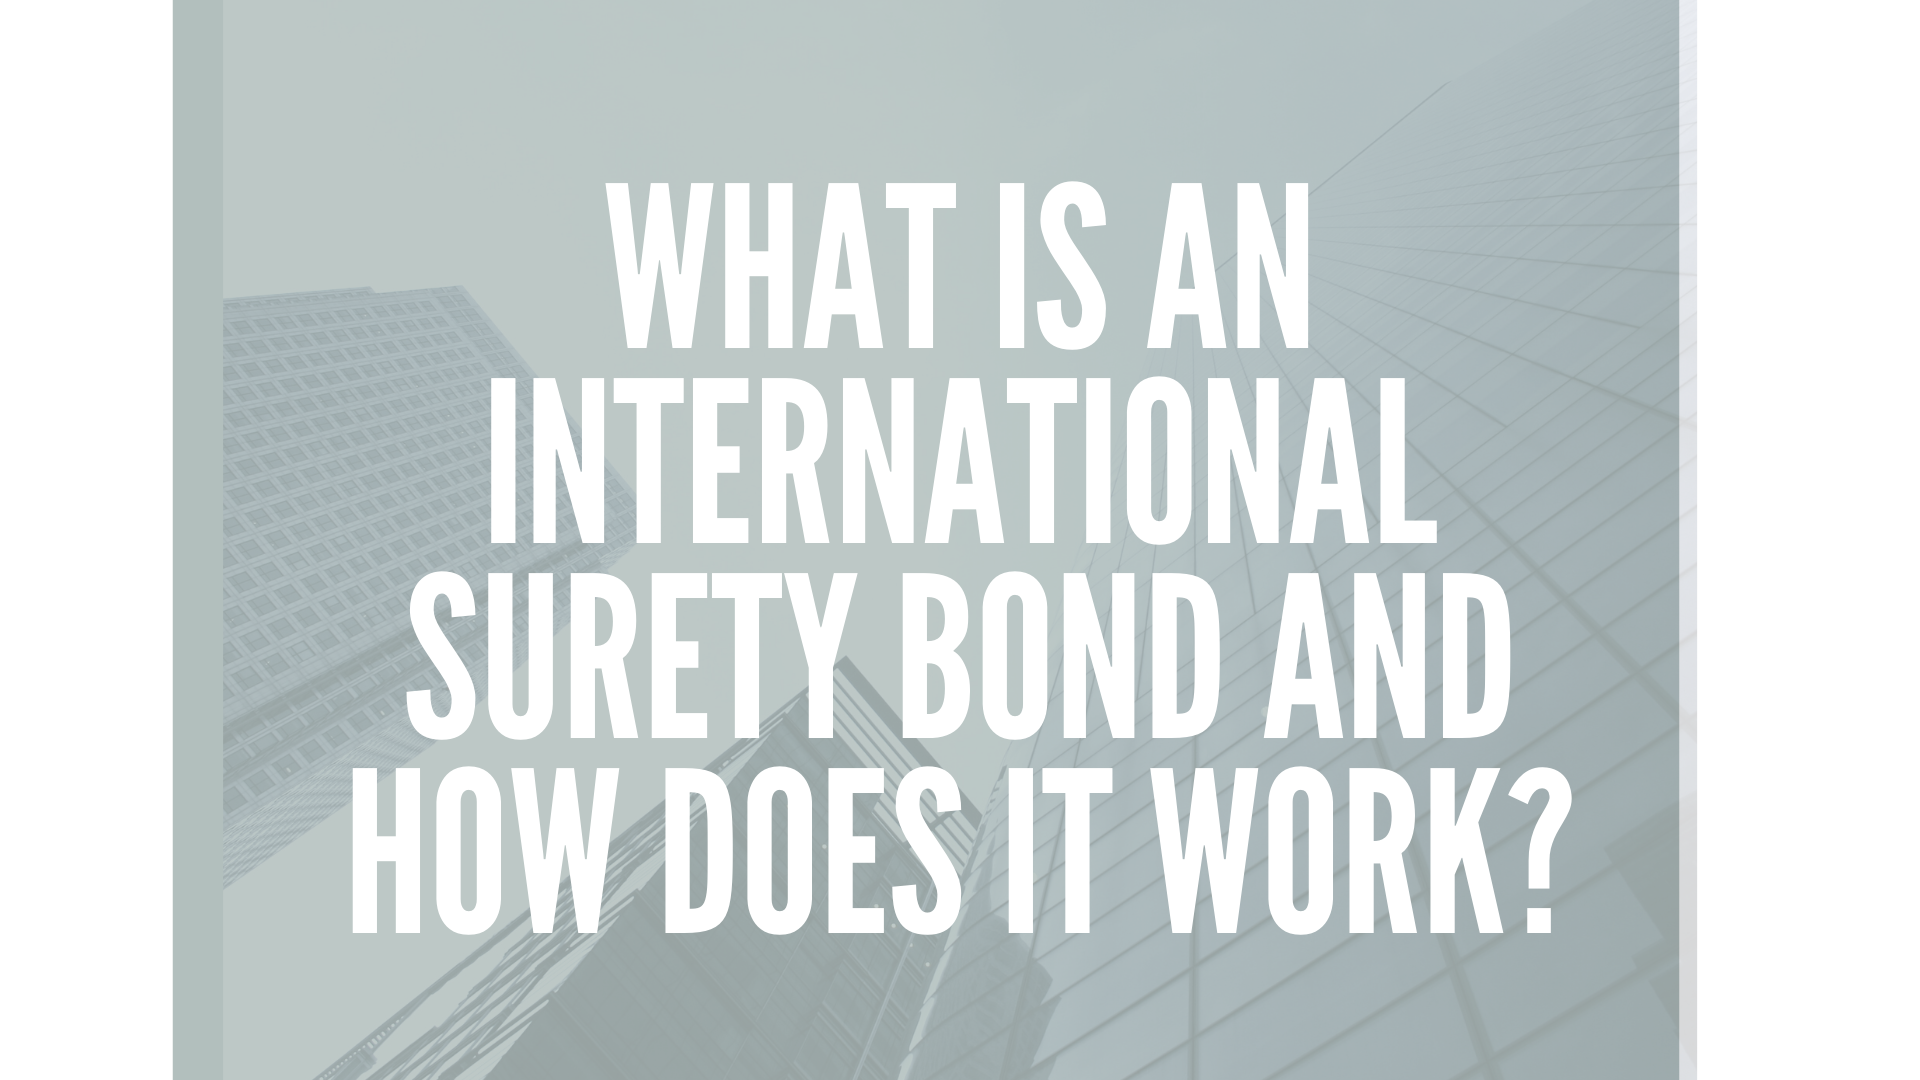 surety bond - What is the International Surety Bond and how does it work - exterior of a building